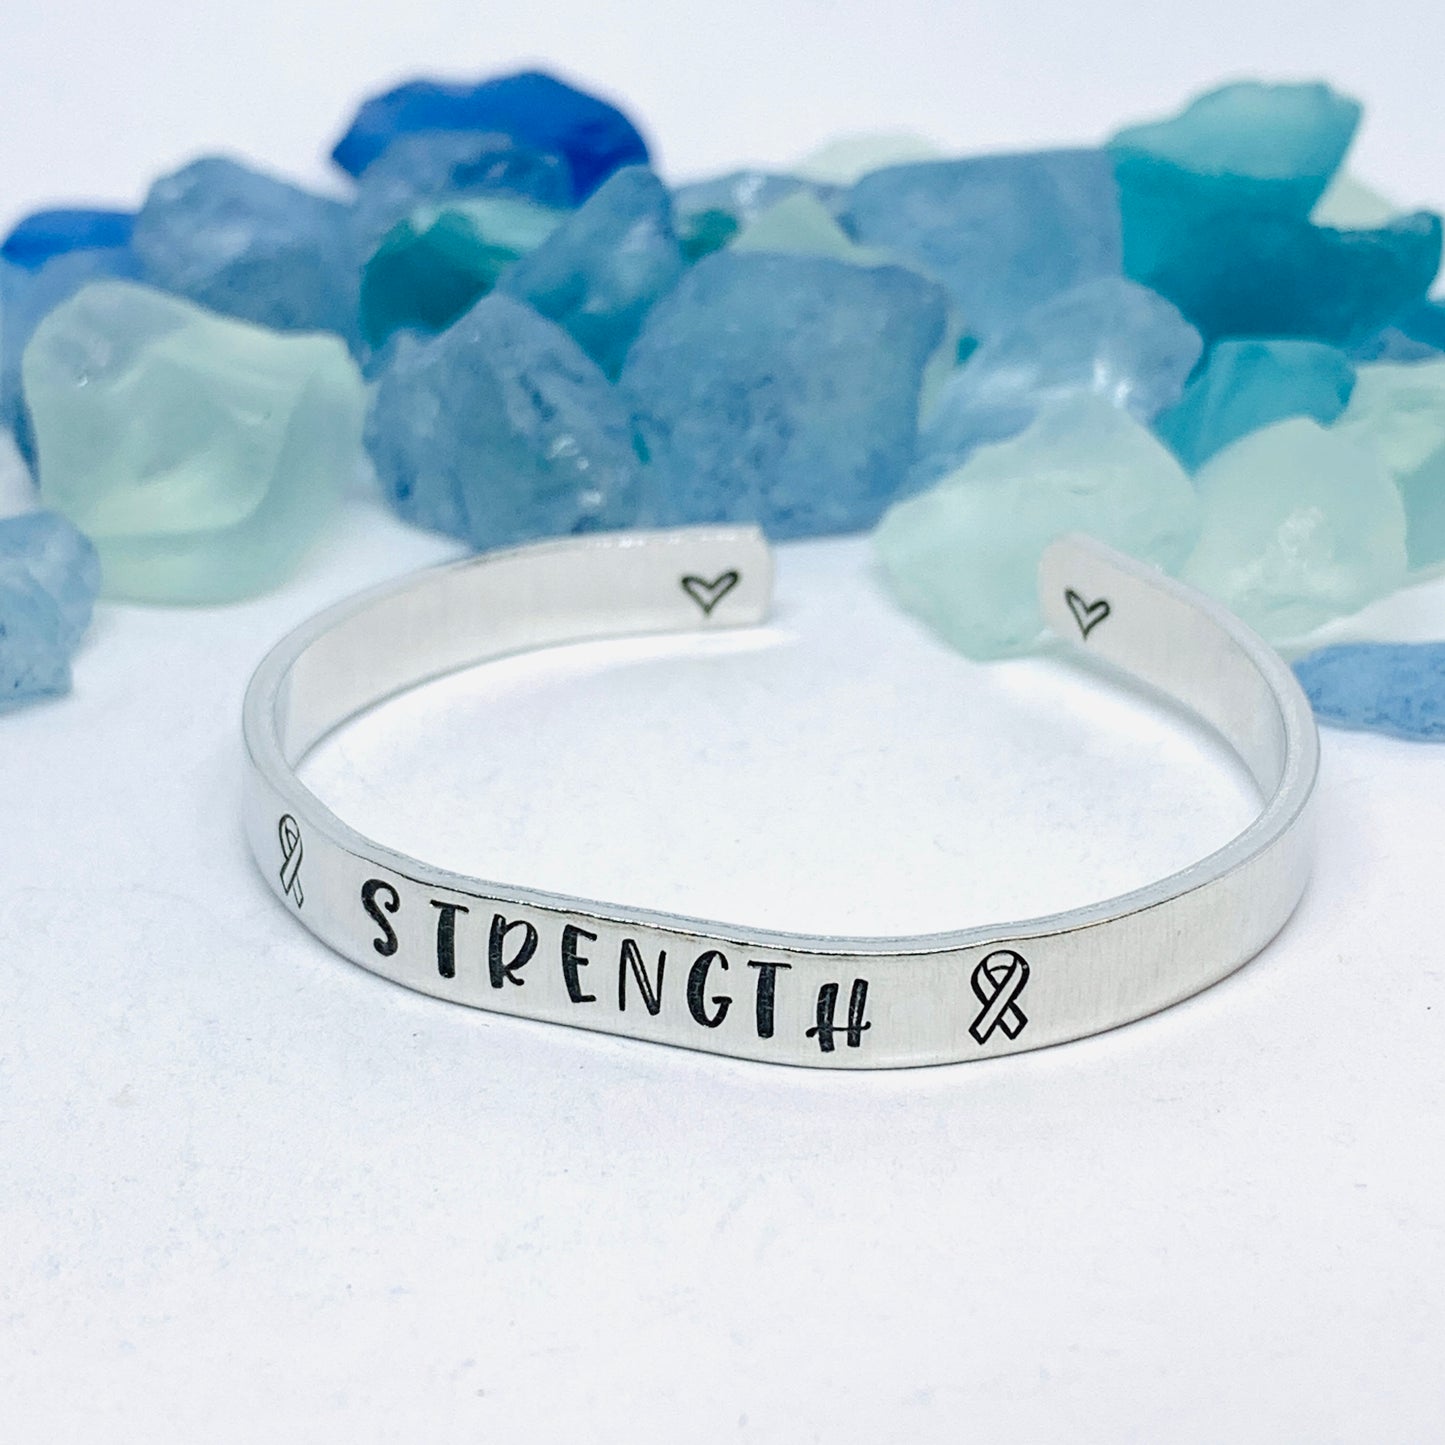 Strength - Hand Stamped Cuff Bracelet | Cancer Awareness | Motivational Jewelry